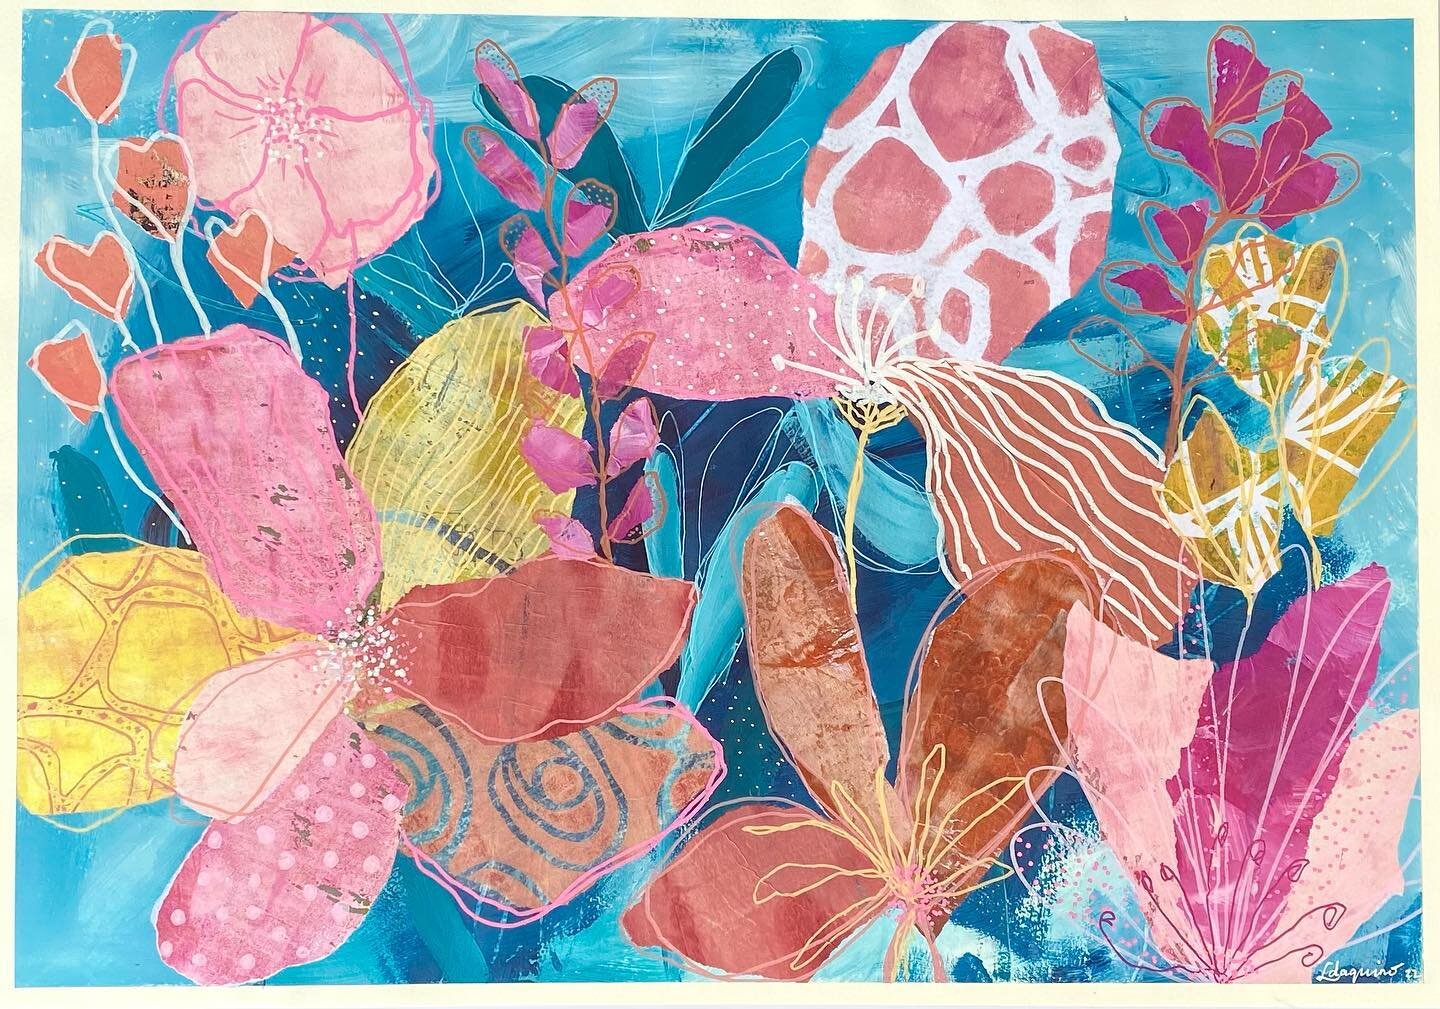 Day 112
Playing - trying some new shapes and marks 
(acrylic and collage on paper.  42x59cm)

#100daysofpainting #gelliprinting #gelliplate #gelliprint #collage #collageart #tissuepapercollage #handpaintedpaper #handpaintedpapercollage #abstractflora